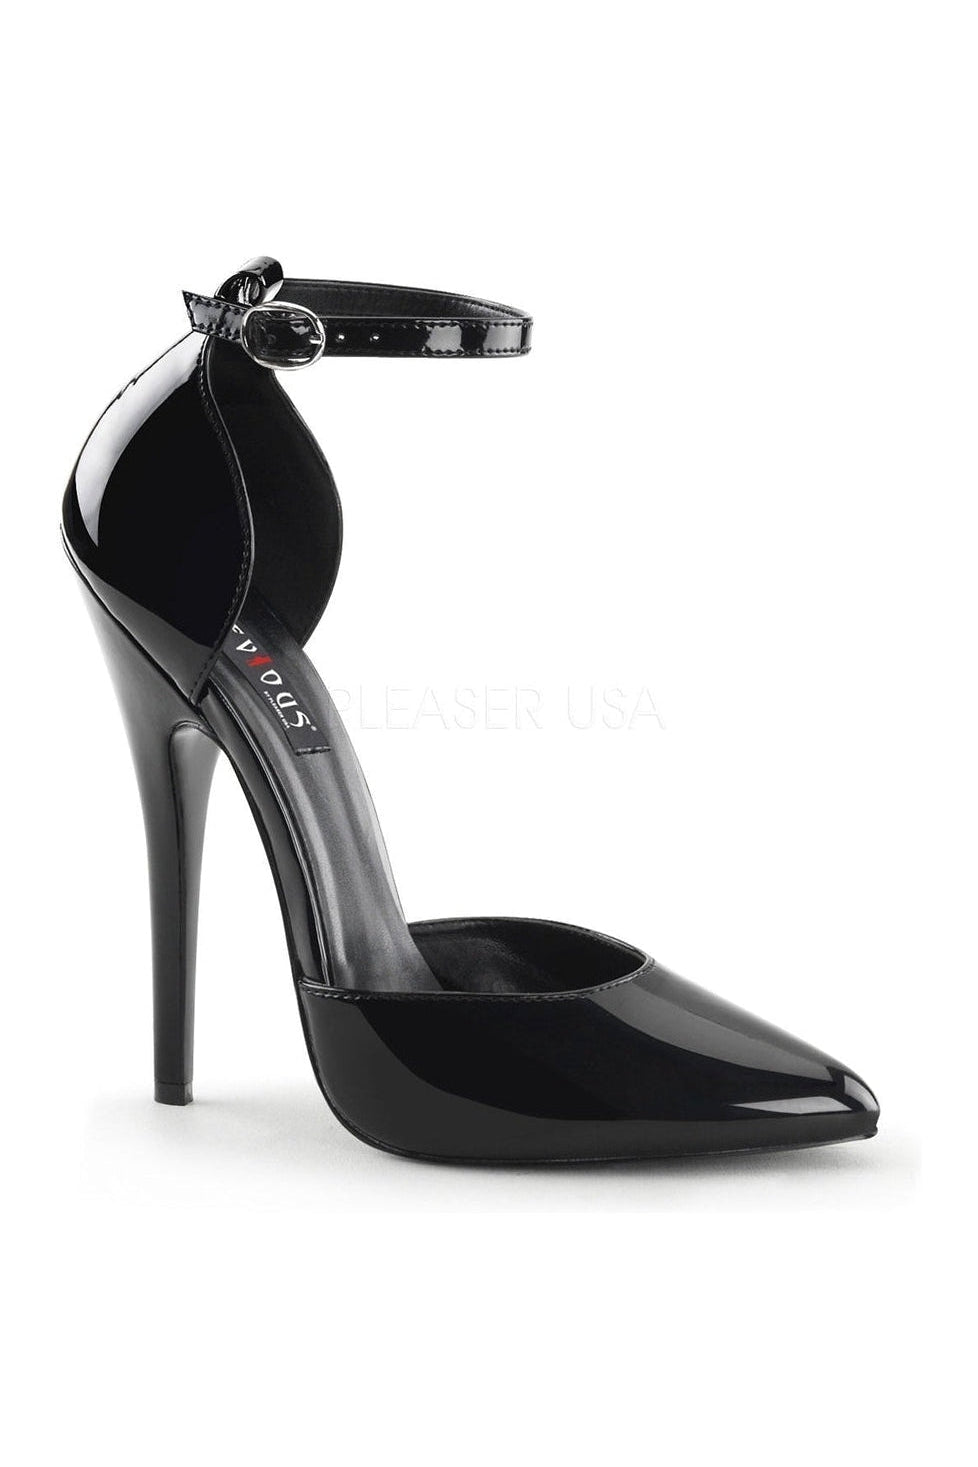 DOMINA-402 Pump | Black Patent-D'Orsays- Stripper Shoes at SEXYSHOES.COM